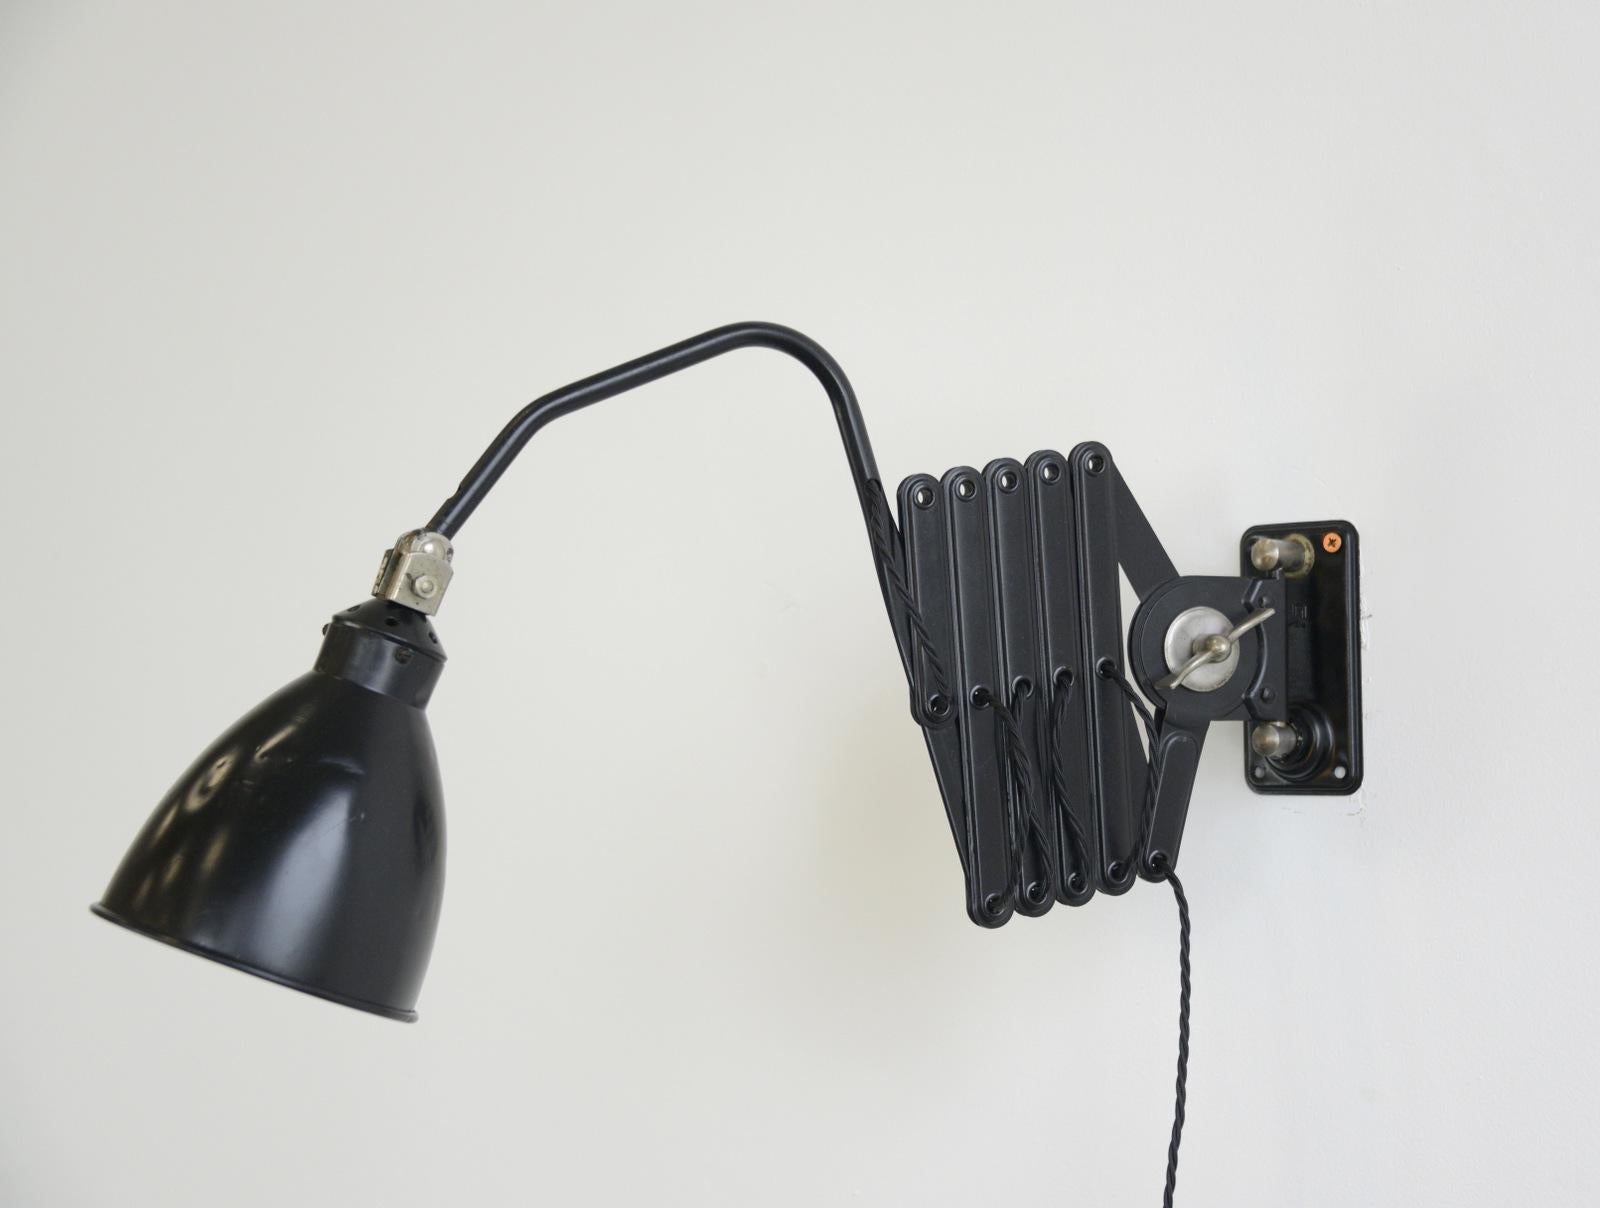 Wall mounted industrial scissor lamp by AGI, circa 1930s

- Fully rewired
- Takes E27 fitting bulbs
- Steel scissor mechanism with aluminium shade
- Belgian, circa 1930s
- Shade measures 16cm x 16cm
- Scissor extends 60cm - 110cm from the